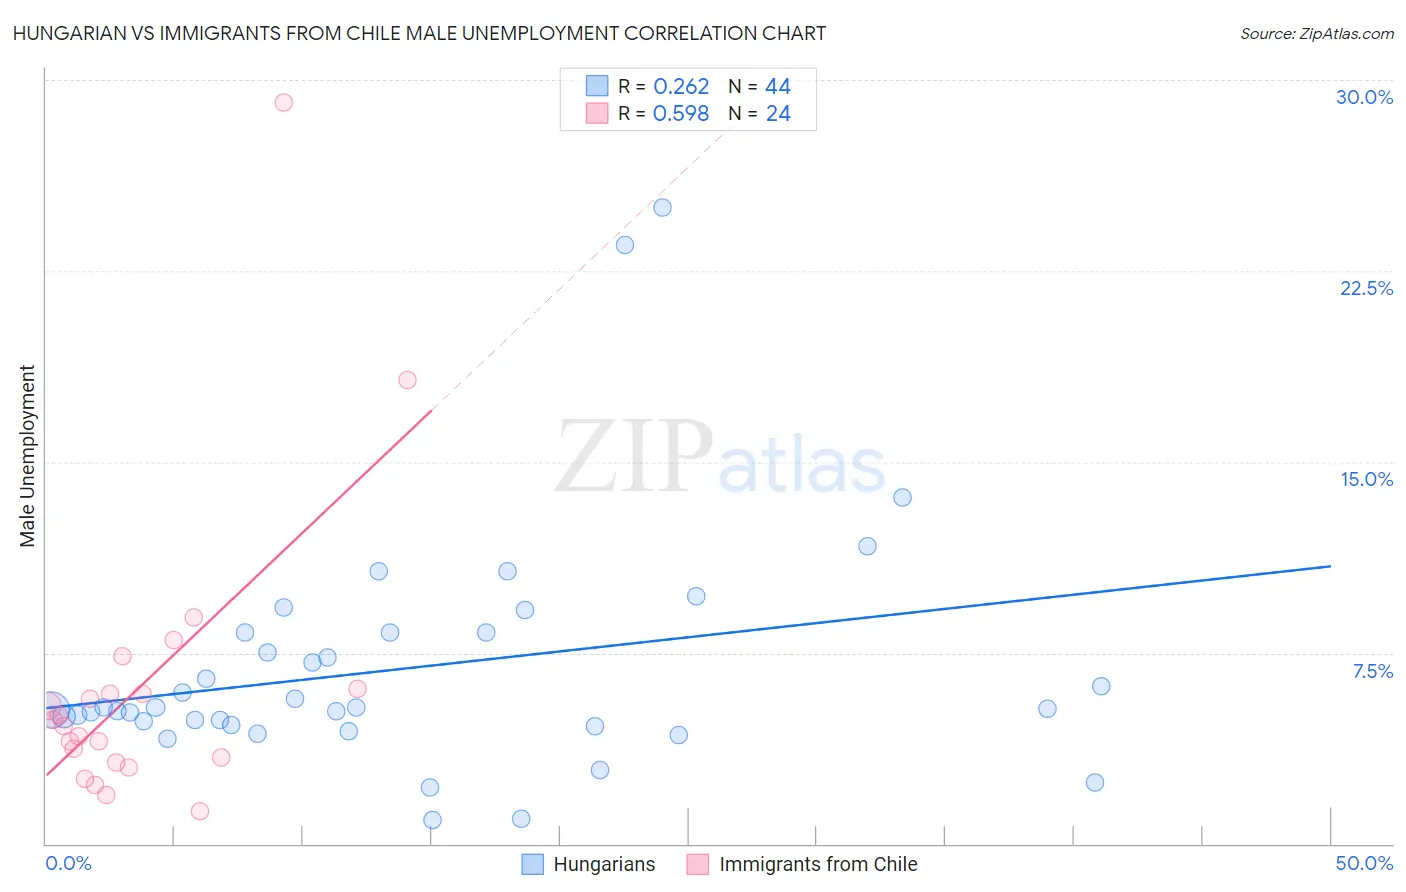 Hungarian vs Immigrants from Chile Male Unemployment